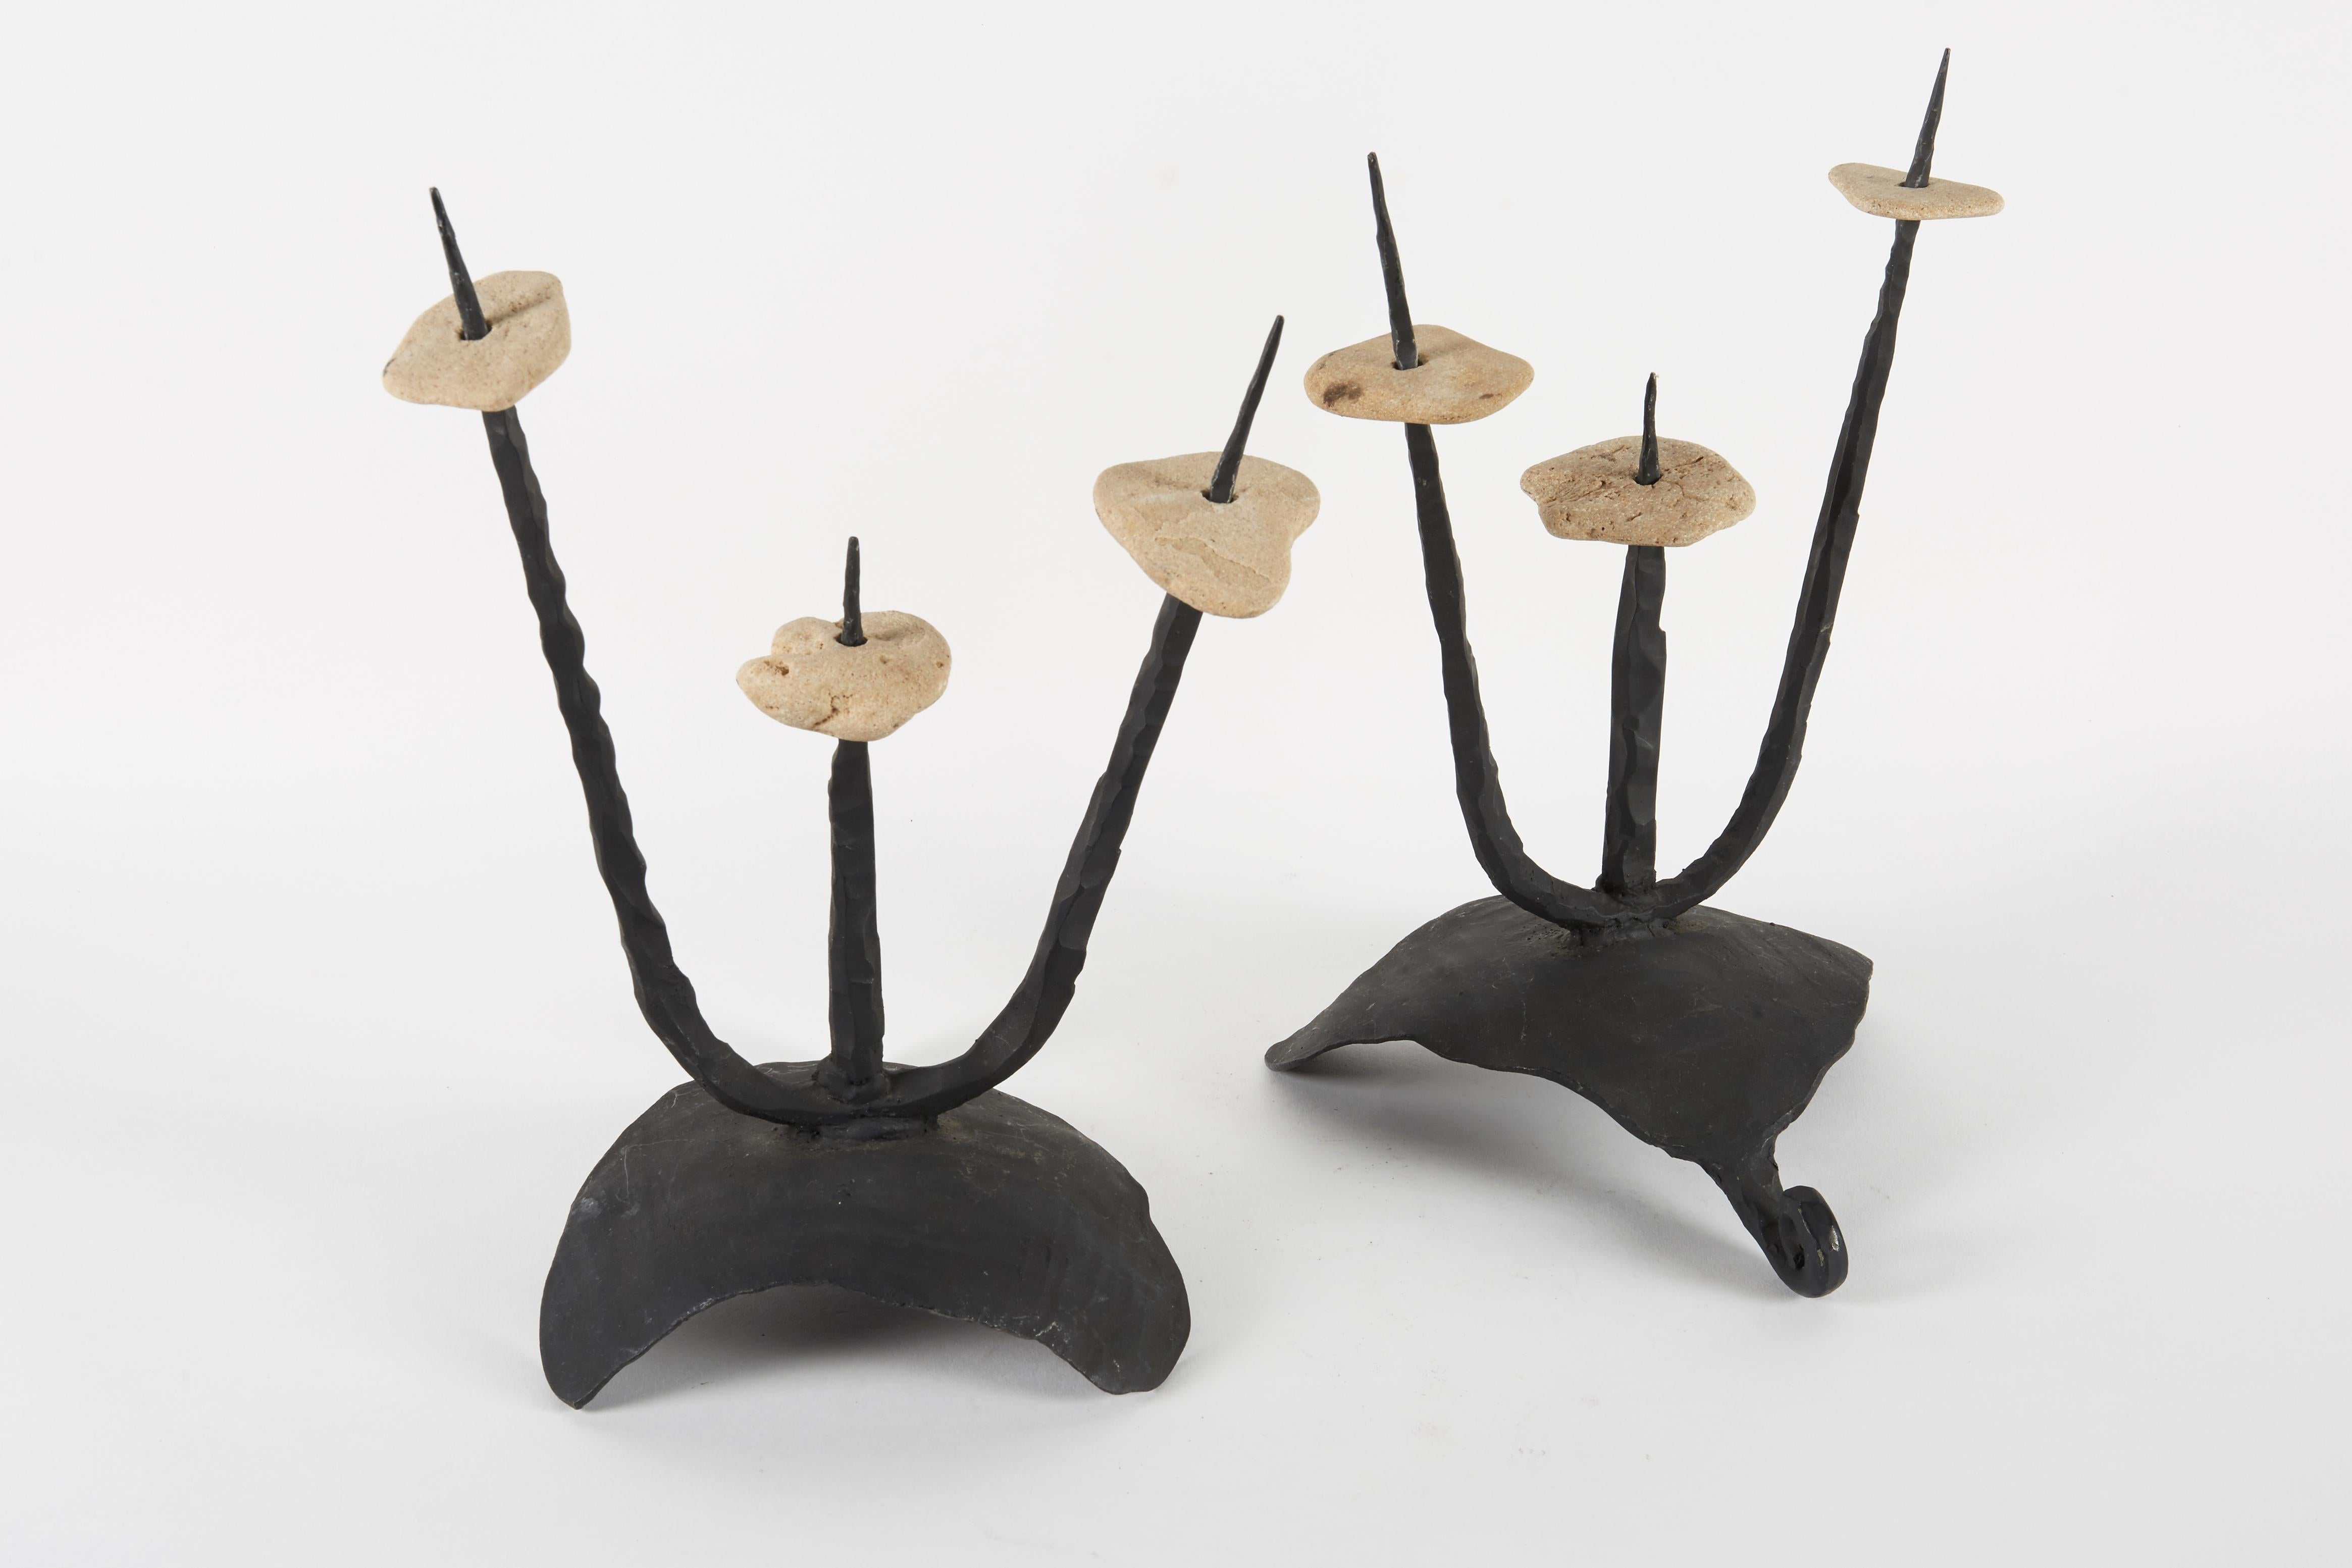 These two pieces by Israeli artist David Palombo are in his signature Brutalist style and use the two materials he is best known for iron and natural stone. Fully functional as candle holders, they also have great presence as free standing